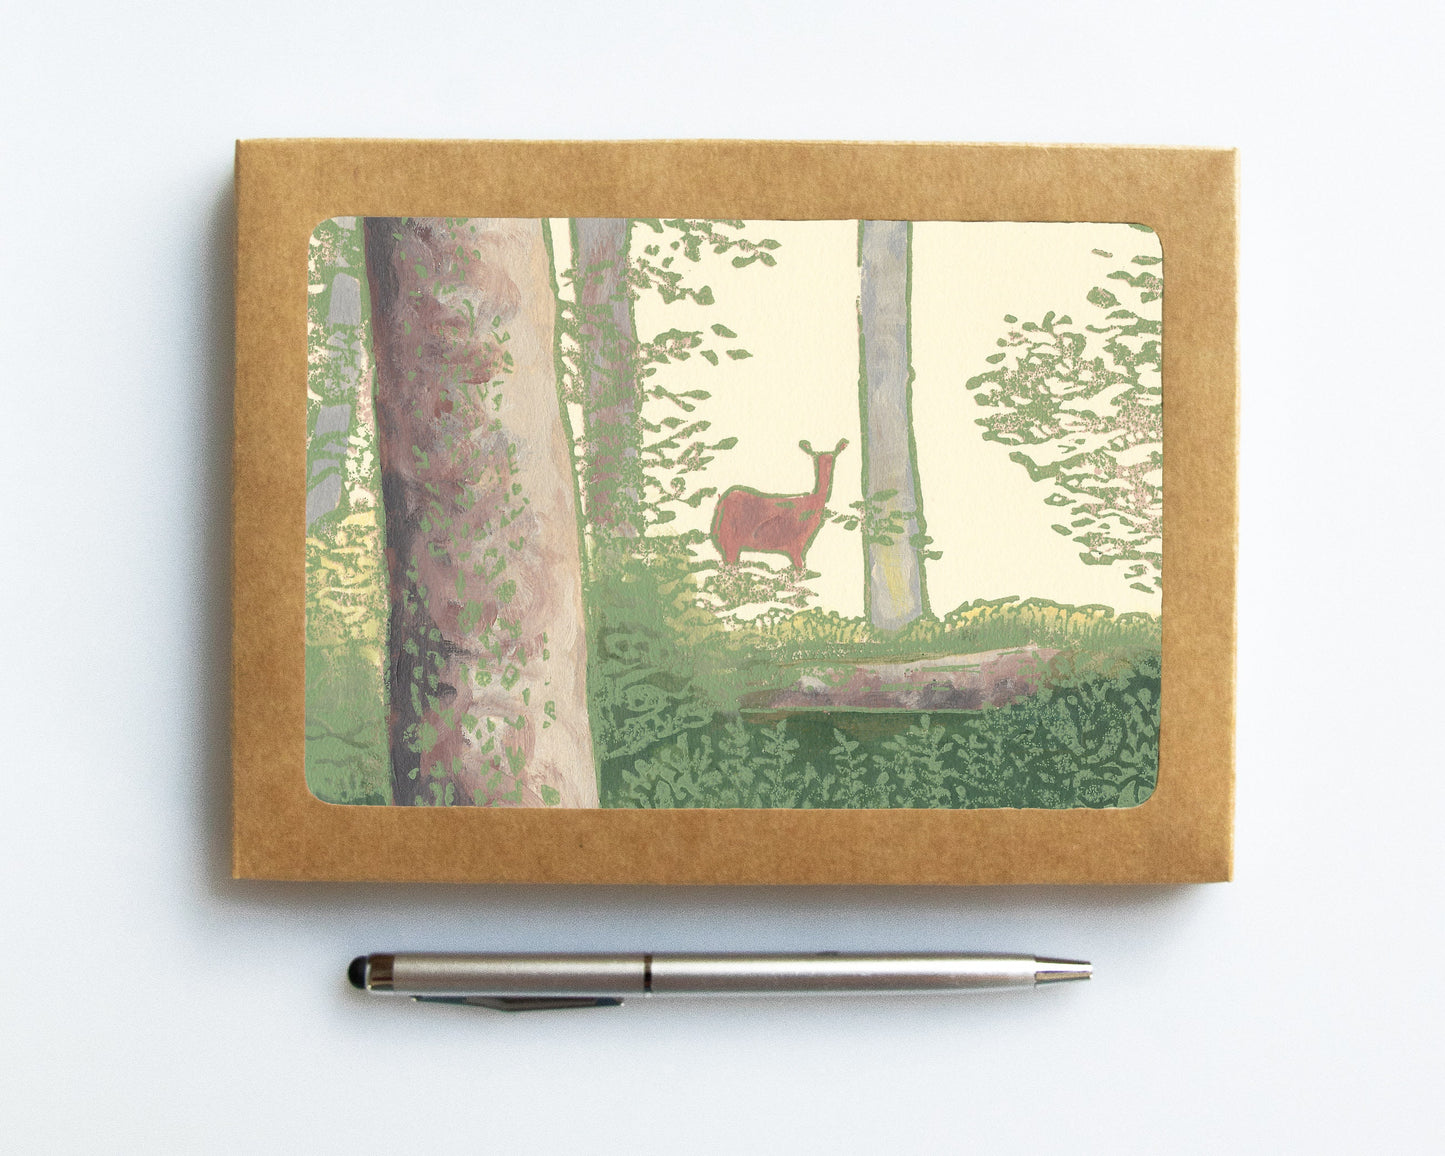 A casually elegant card set featuring Michigan wildlife art by Natalia Wohletz titled Deer in the Woods.